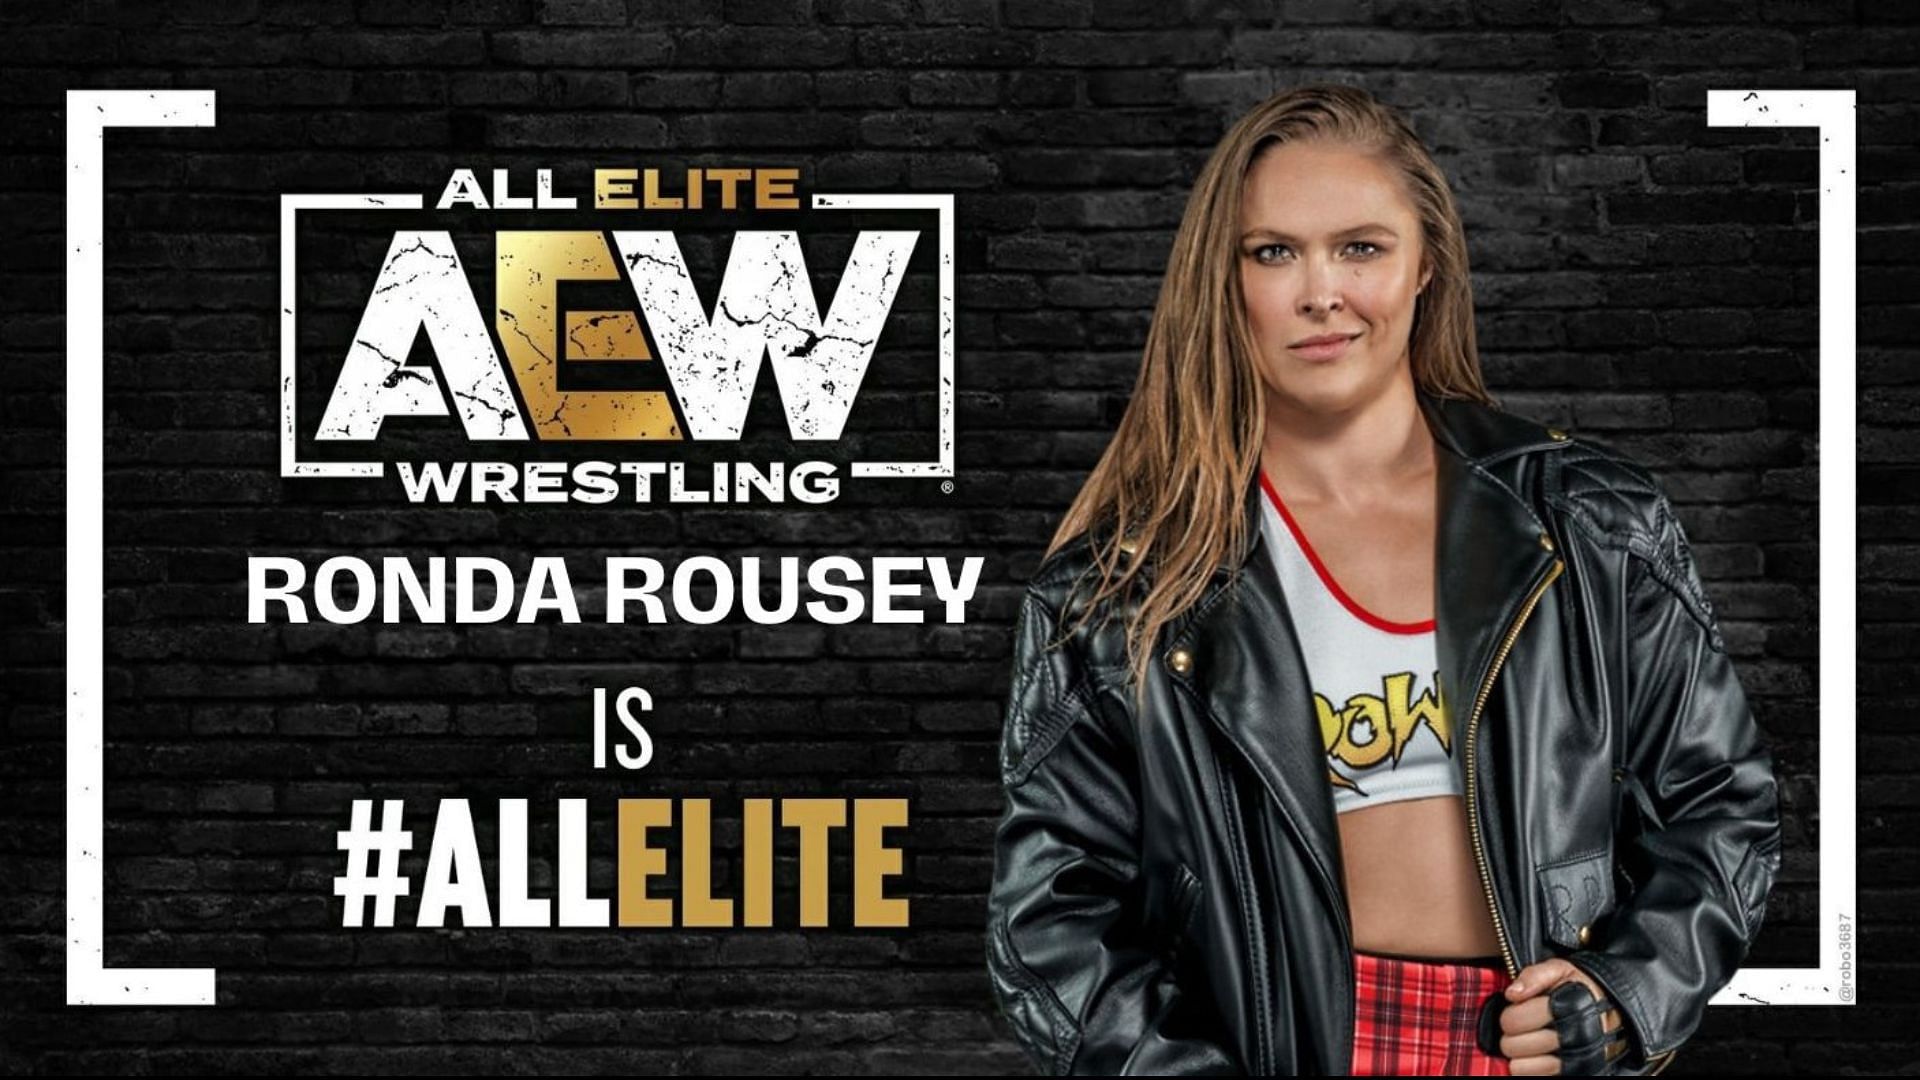 Ronda Rousey is a MMA fighter turned professional wrestler